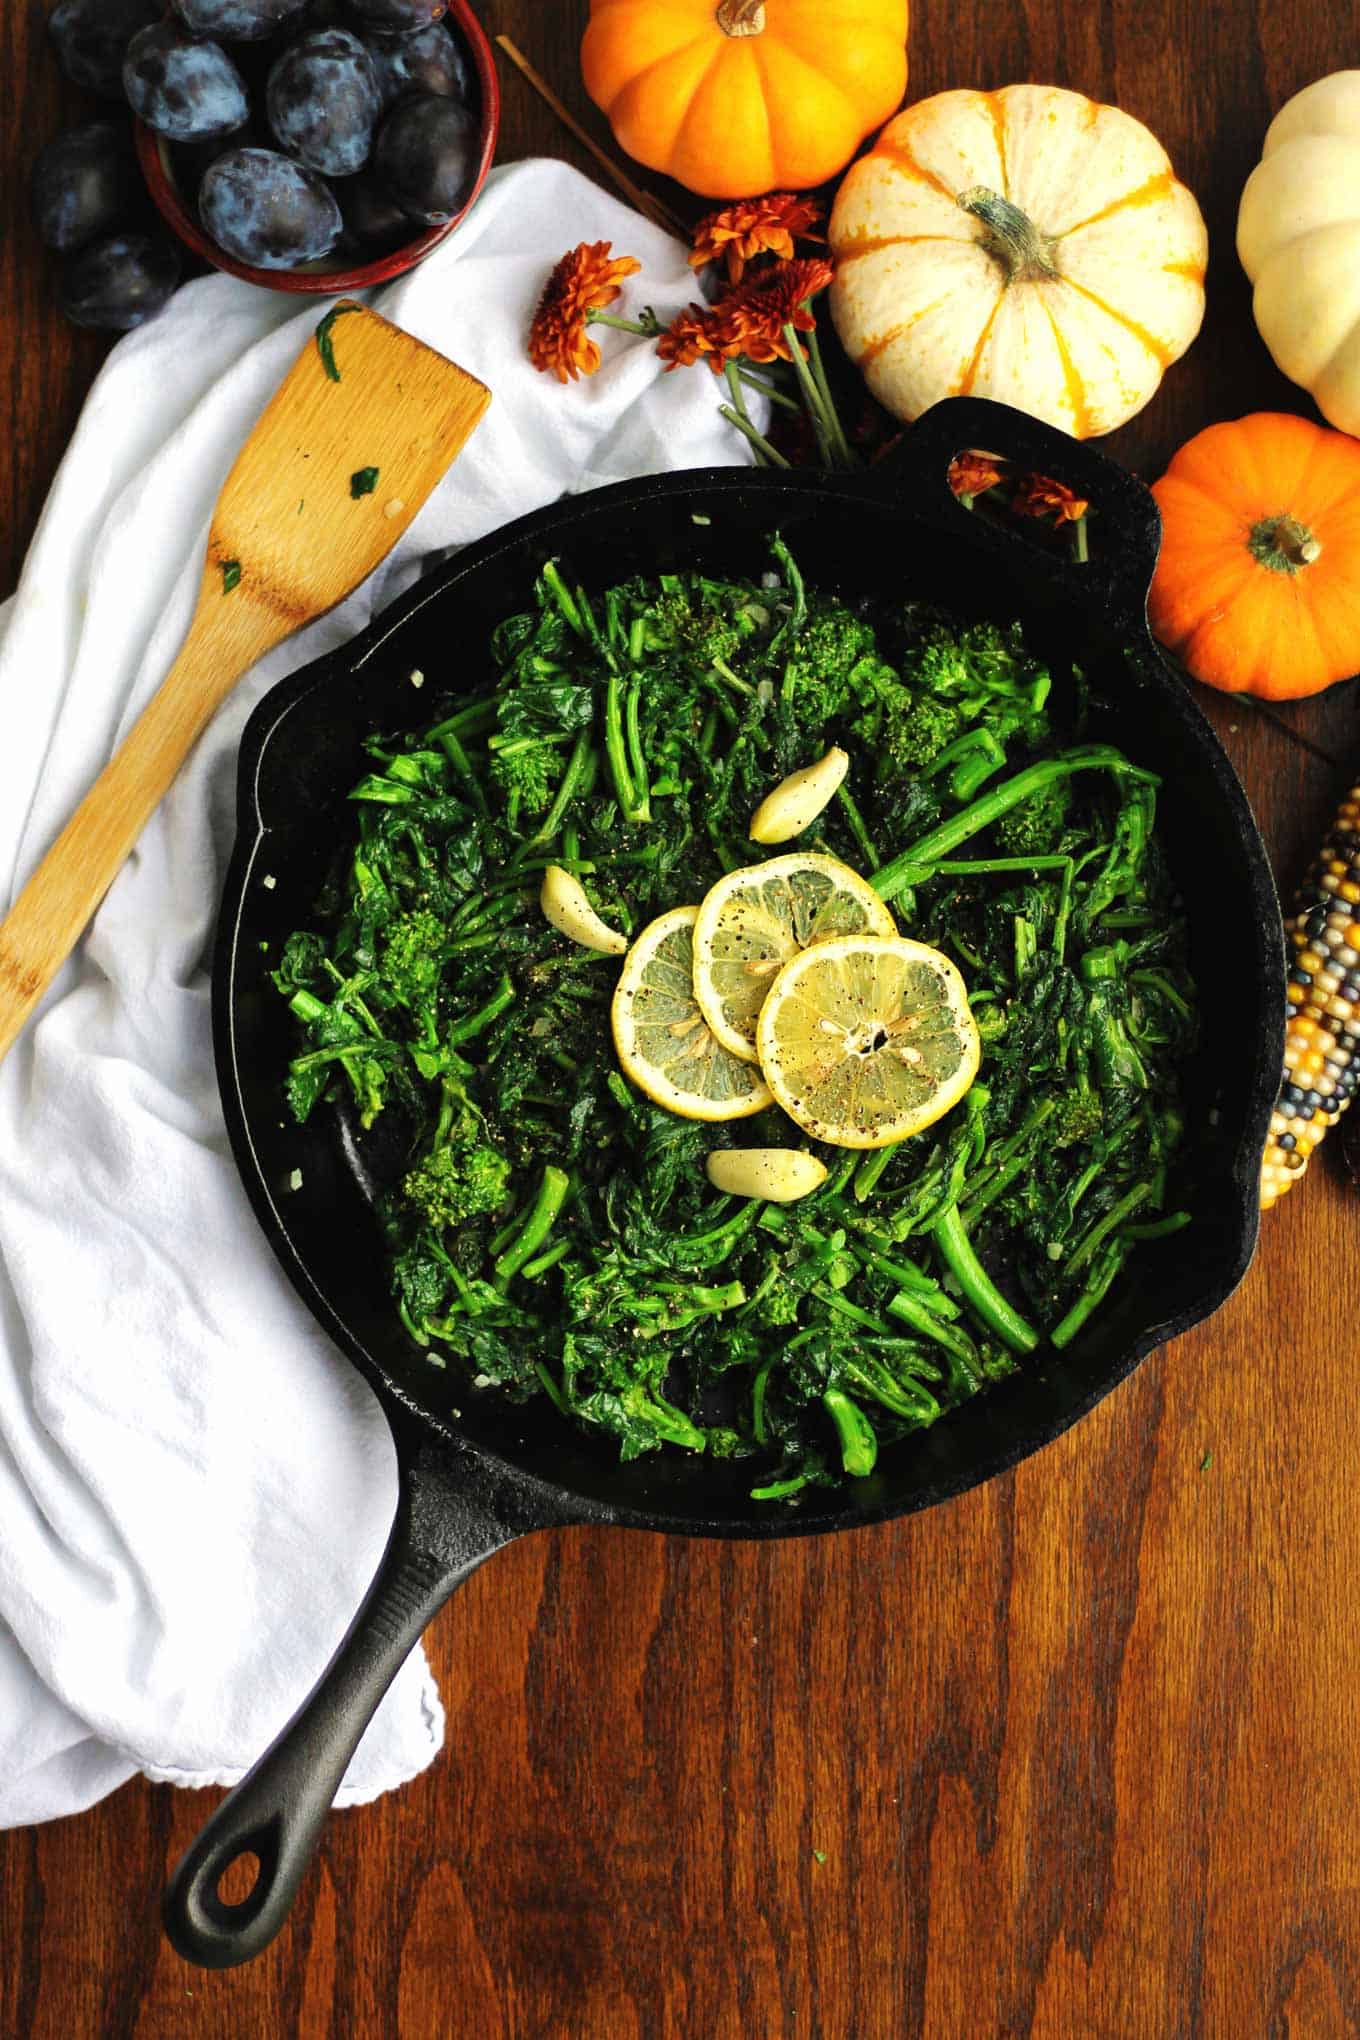 A photo of sauteed broccoli rabe and kale in a black skillet with lemon and garlic on top.